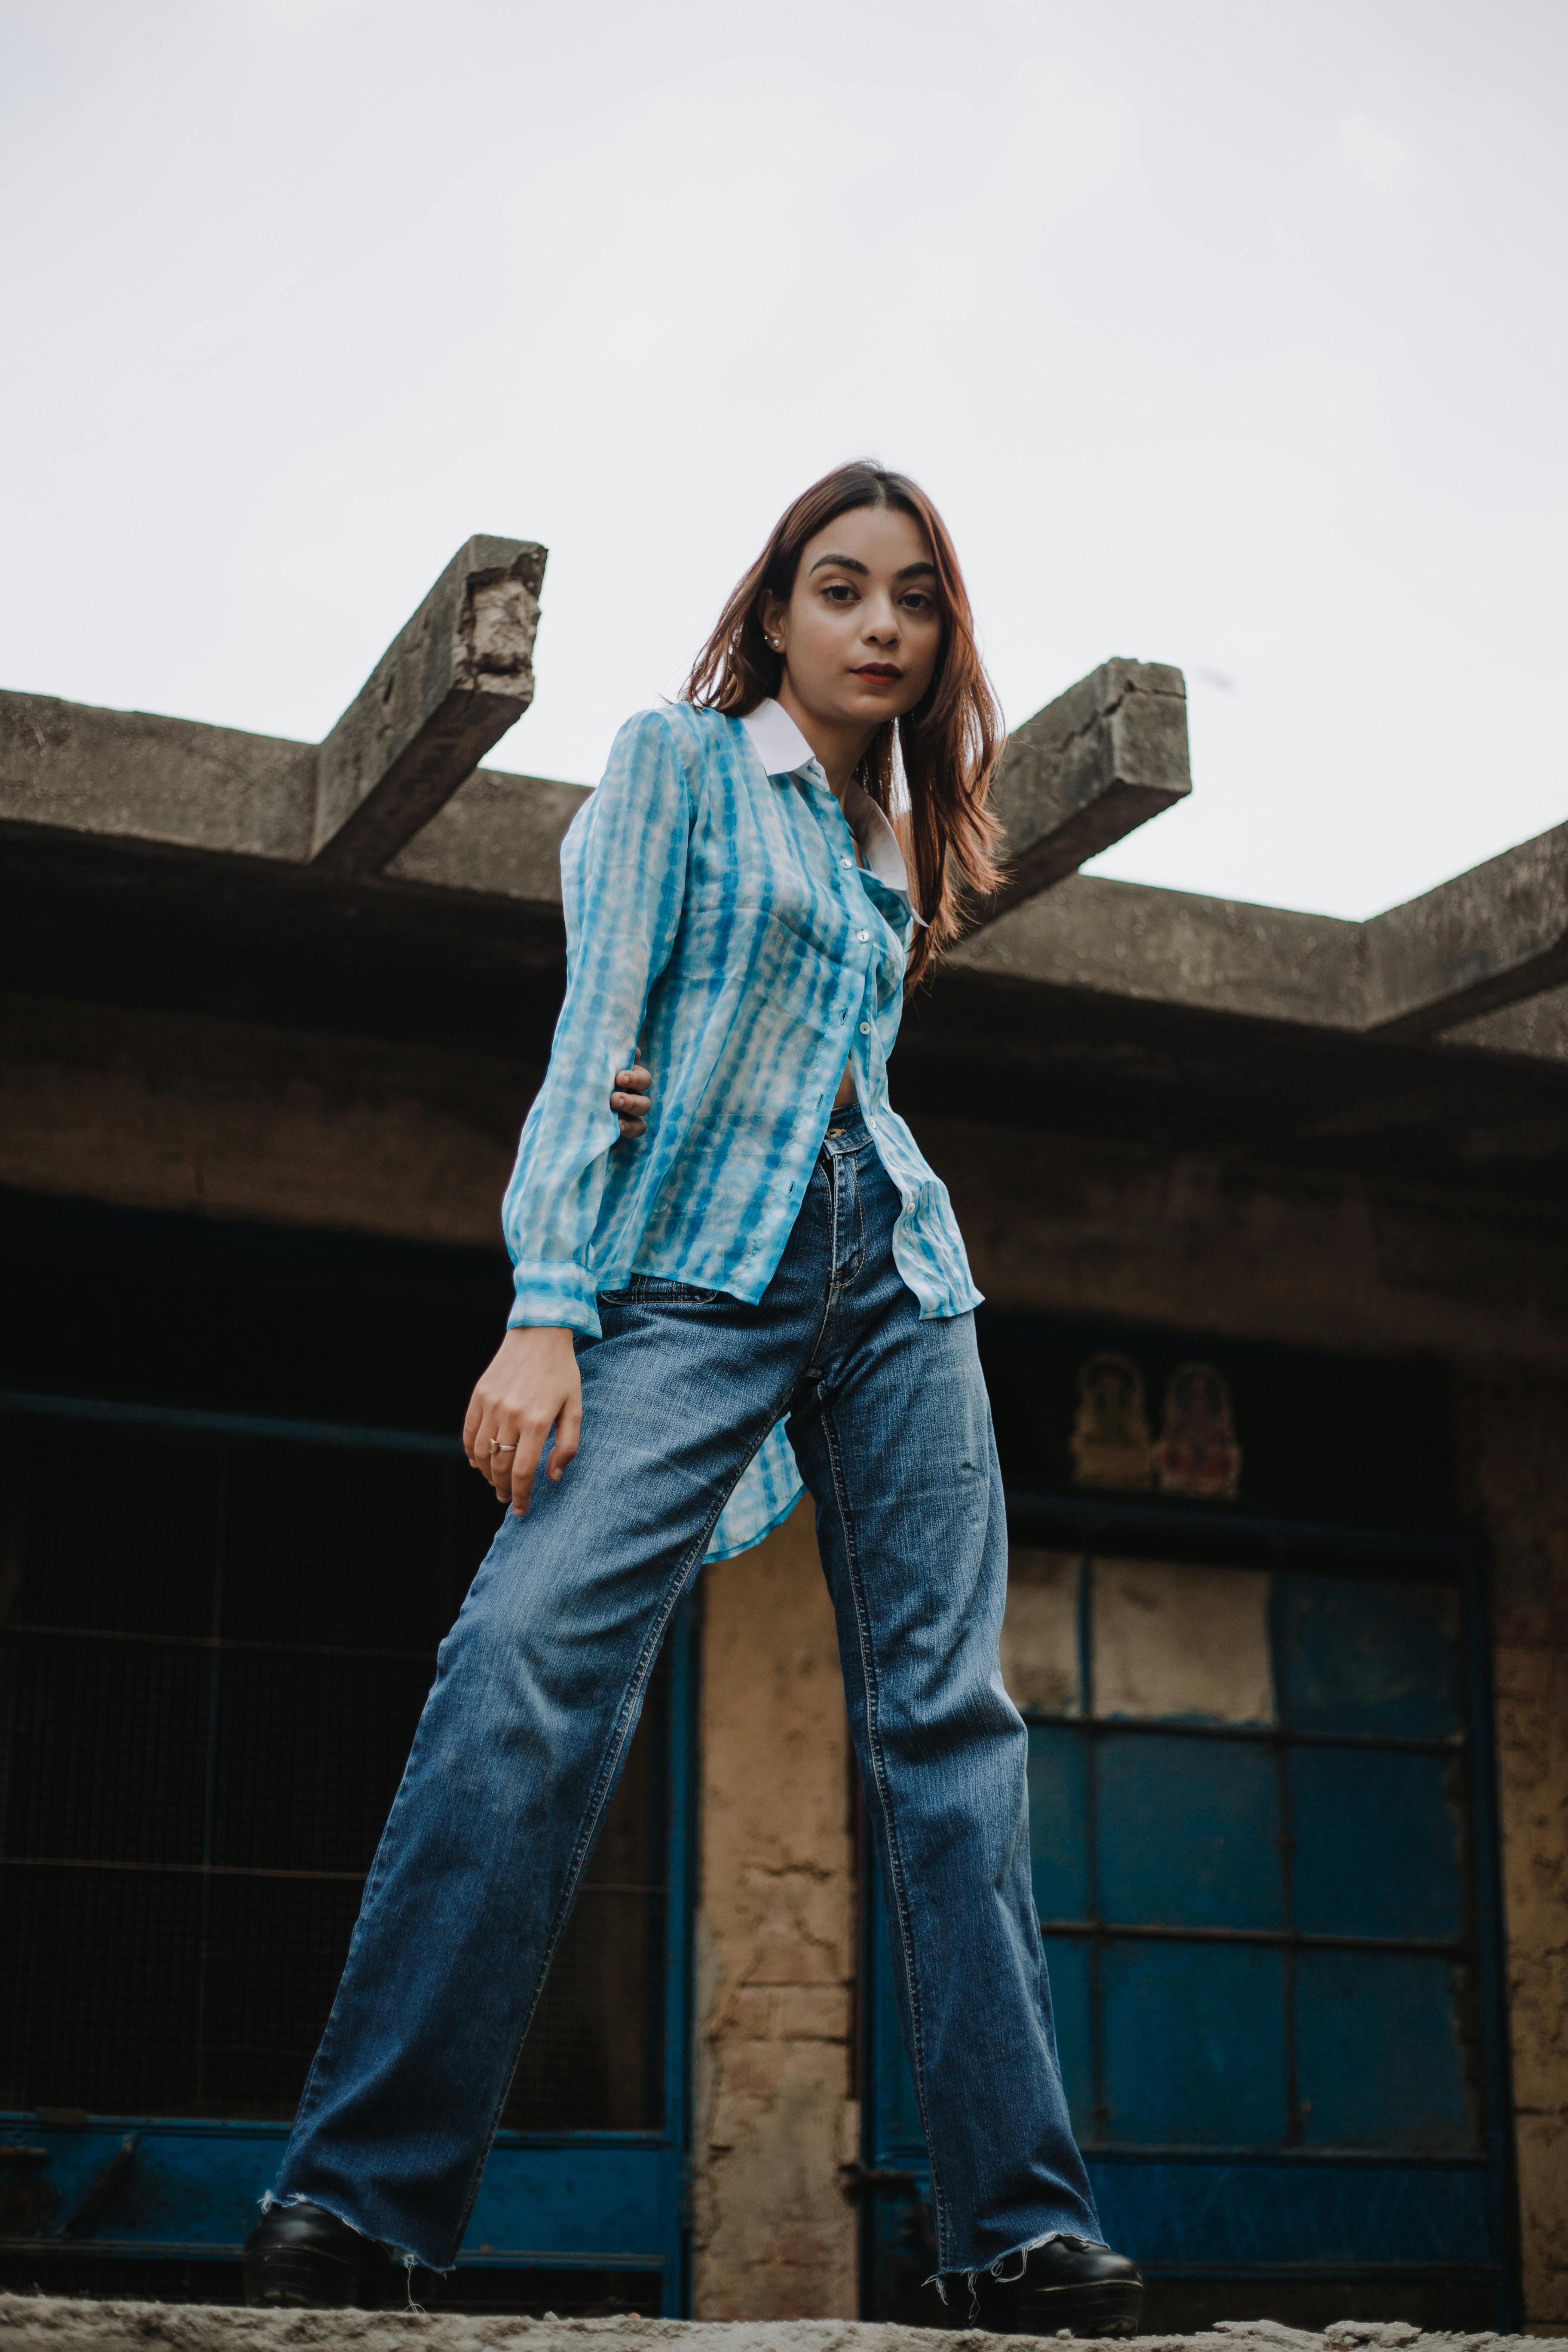 GIrl in jeans posing in ruins. Stock Photo by ©ozimicians 21776401